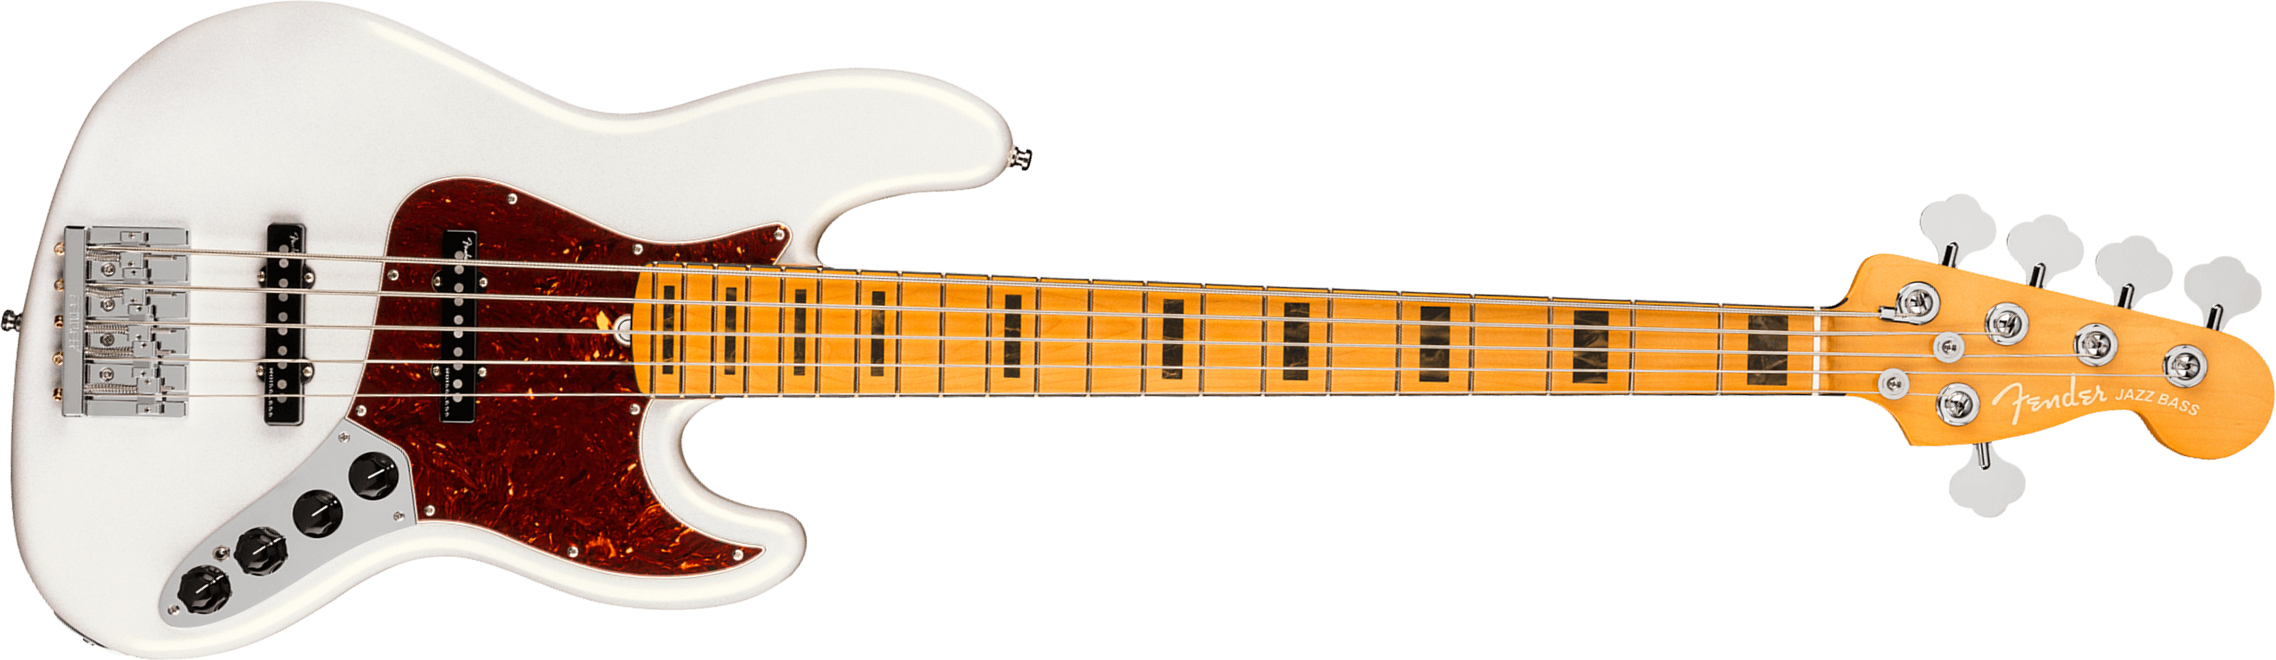 Fender Jazz Bass V American Ultra 2019 Usa 5-cordes Mn - Arctic Pearl - Solidbody E-bass - Main picture